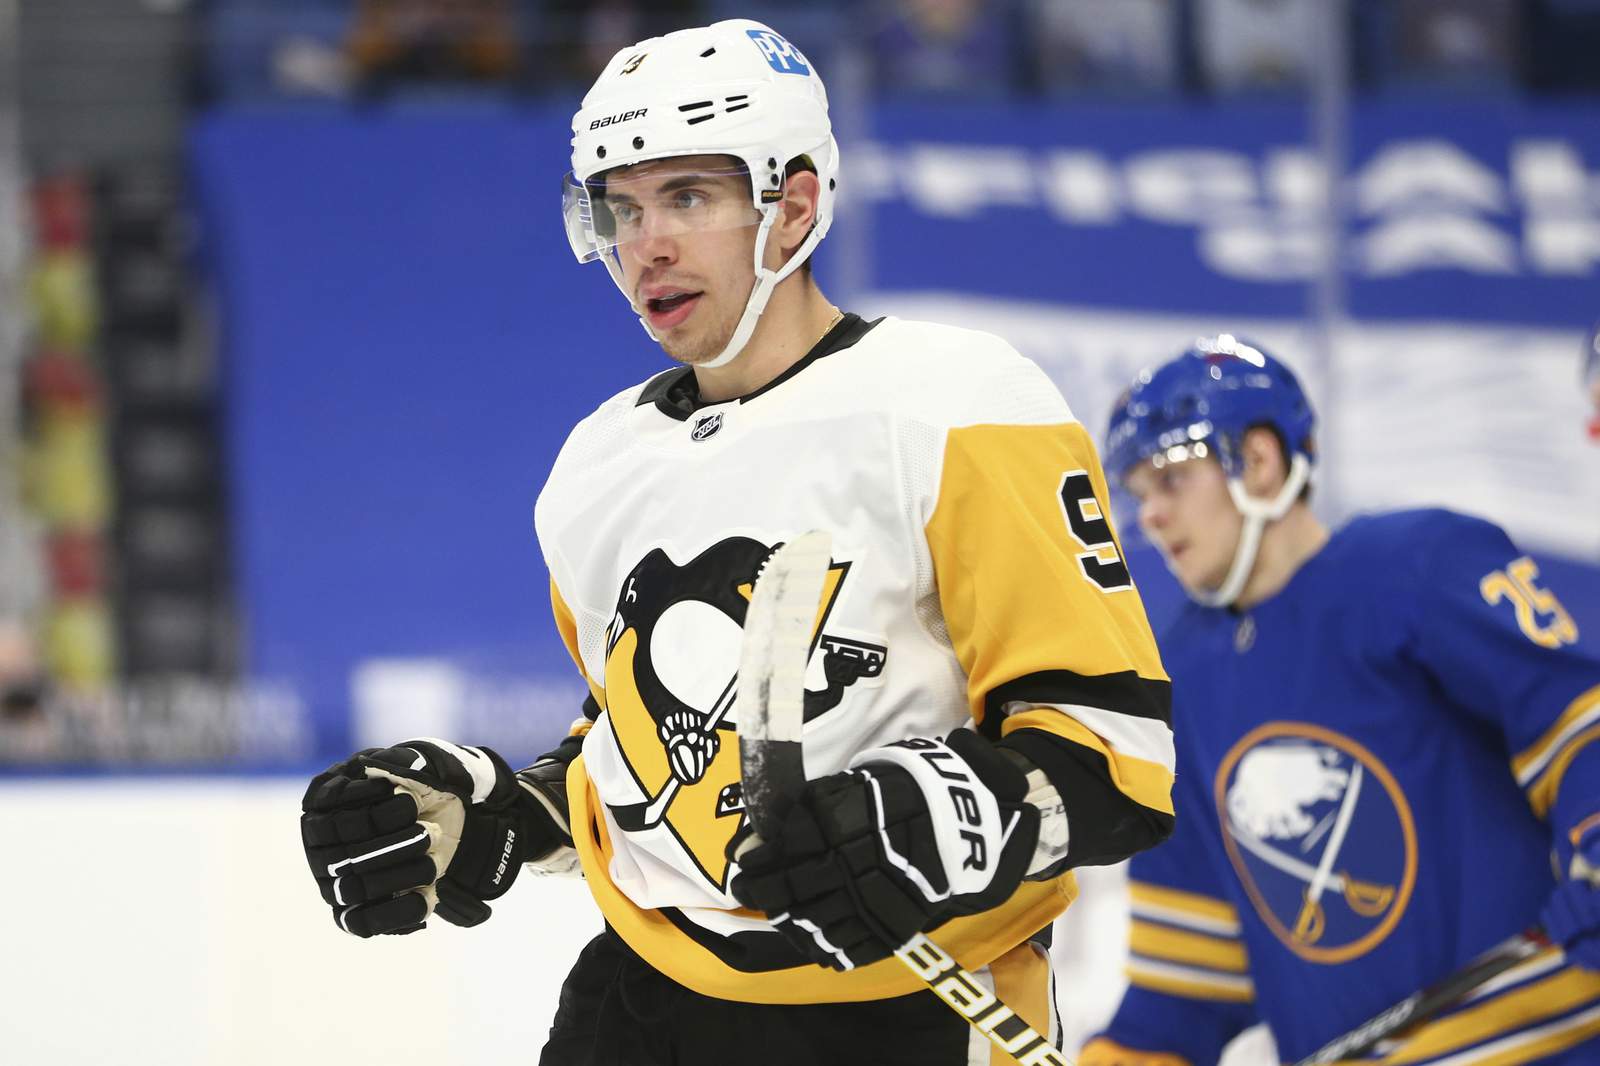 Penguins jump into 2nd in East with 3-2 win over Sabres